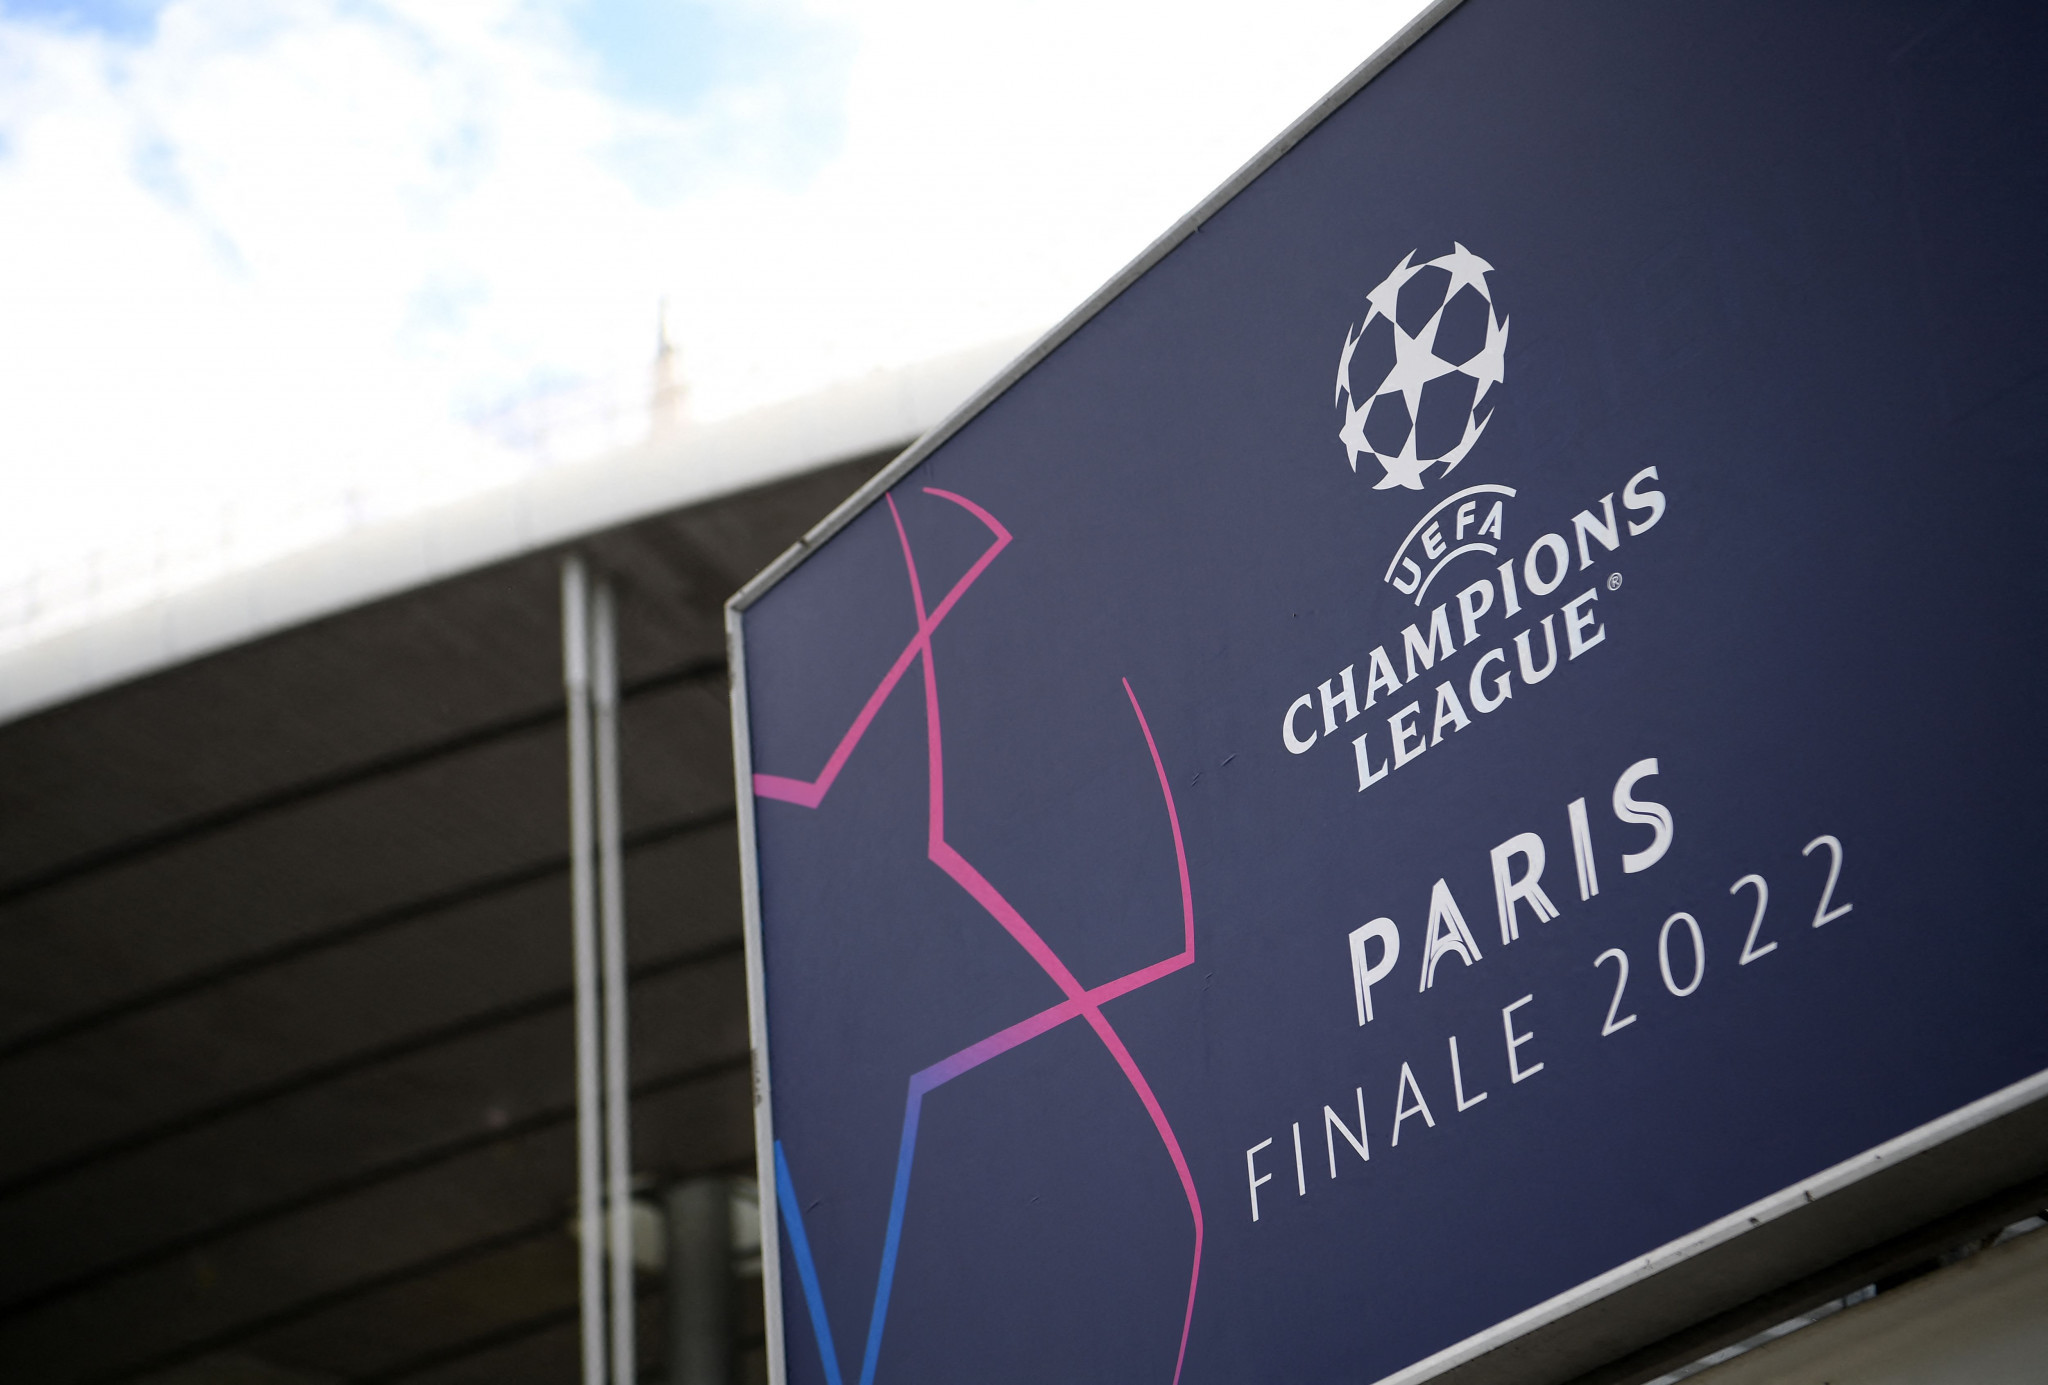 Two people have been sentenced for violence at the Champions League Final in Paris ©Getty Images